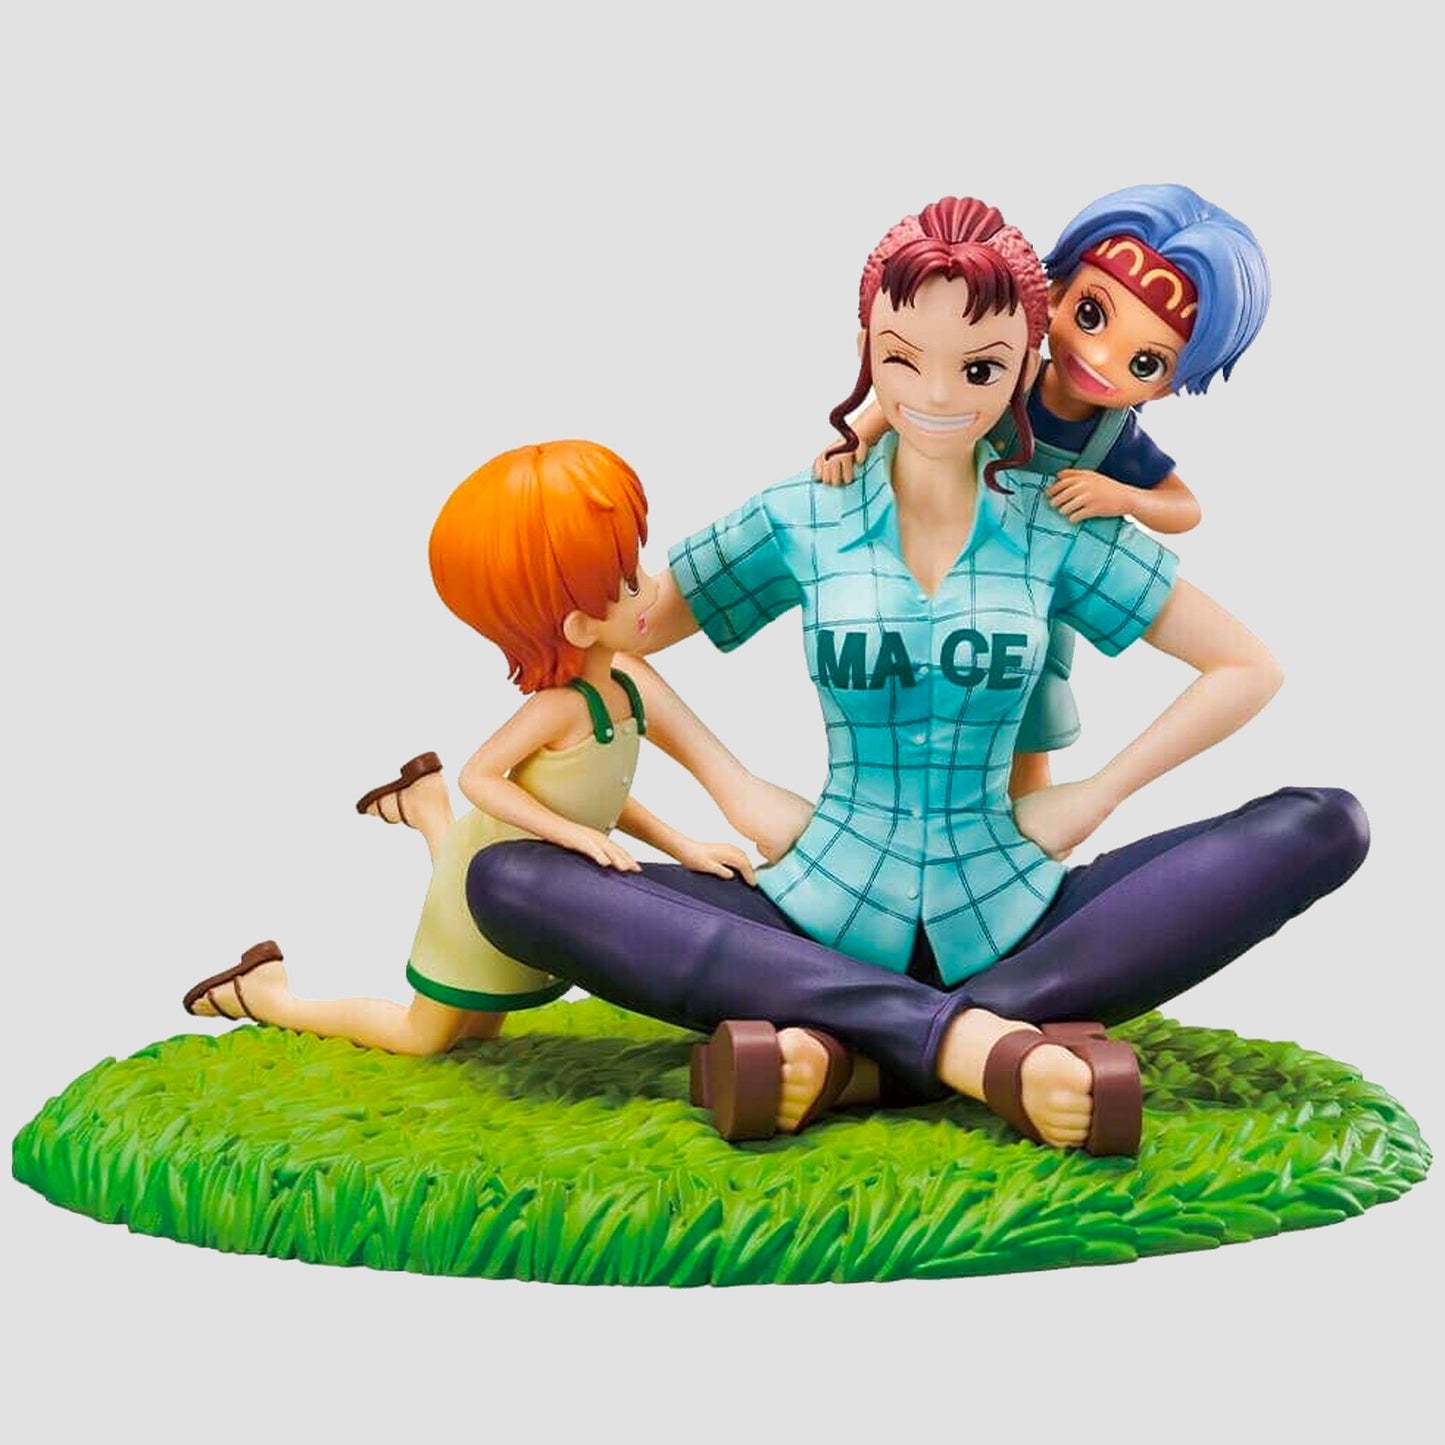 Nami, Nojiko, & Bellemere (One Piece) "Revible Moment" Emotional Stores 2 Statue